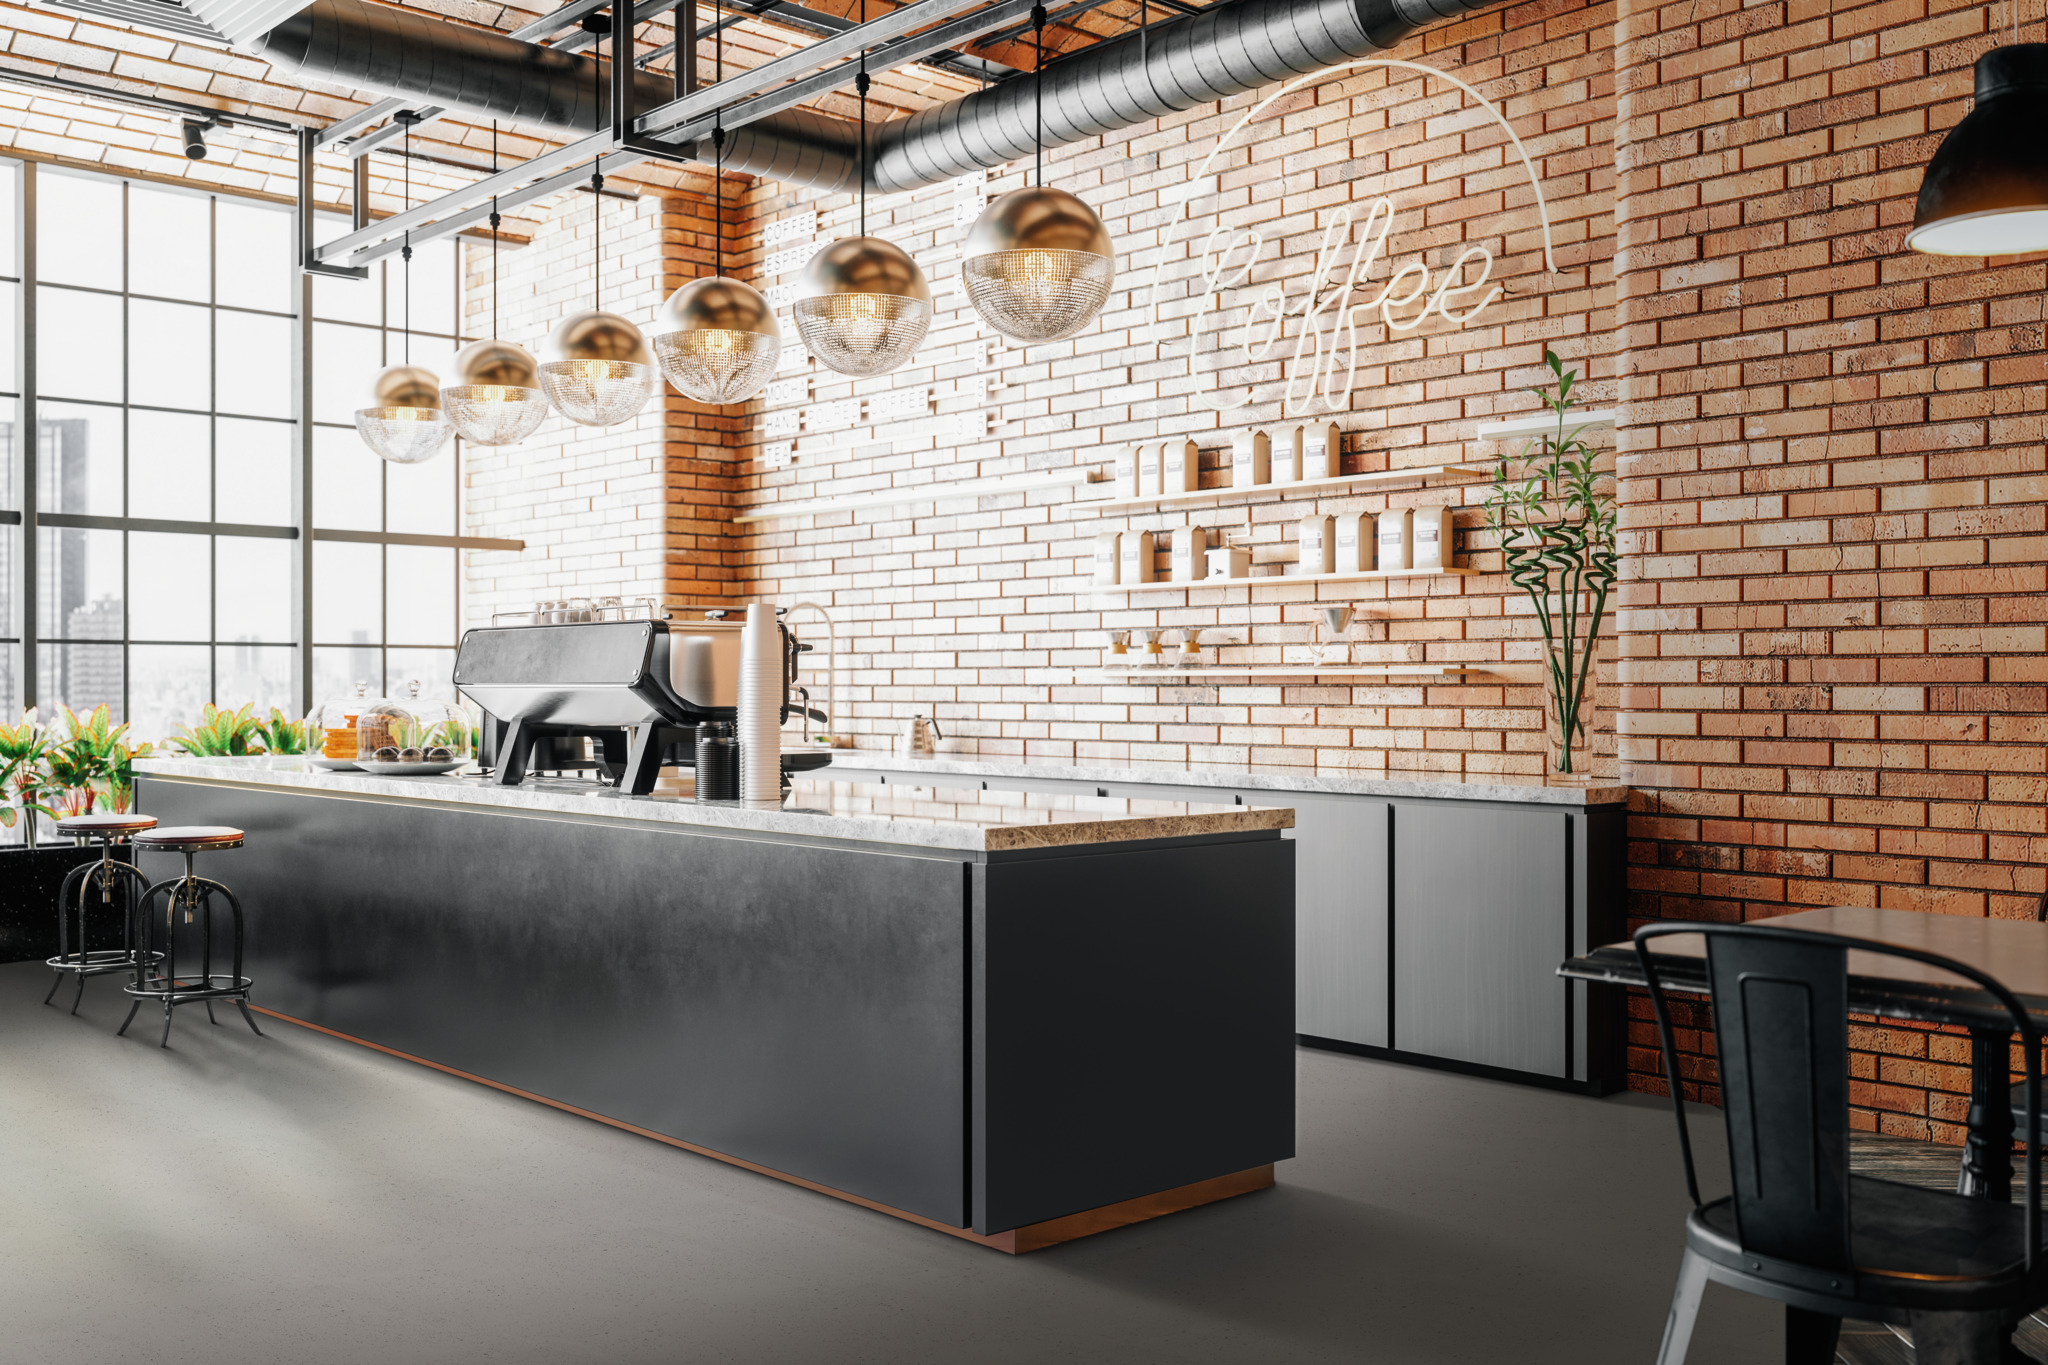 Coffeebar in historical brick ambience with norament 926 kivo floor covering